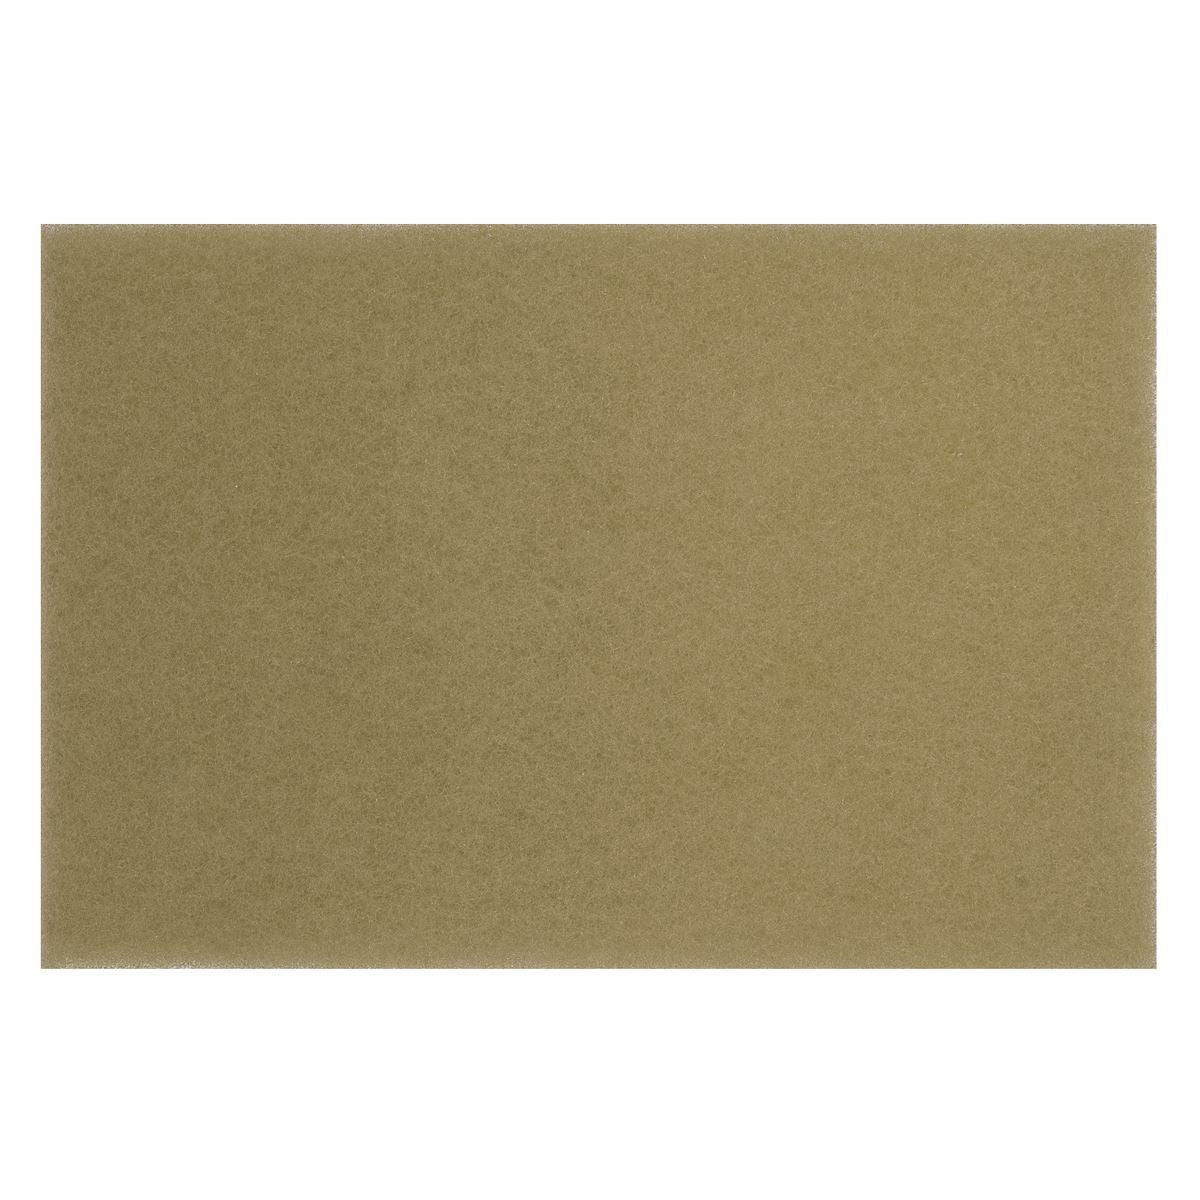 Worksafe by Sealey Tan Buffer Pads 12 x 18 x 1" - Pack of 5